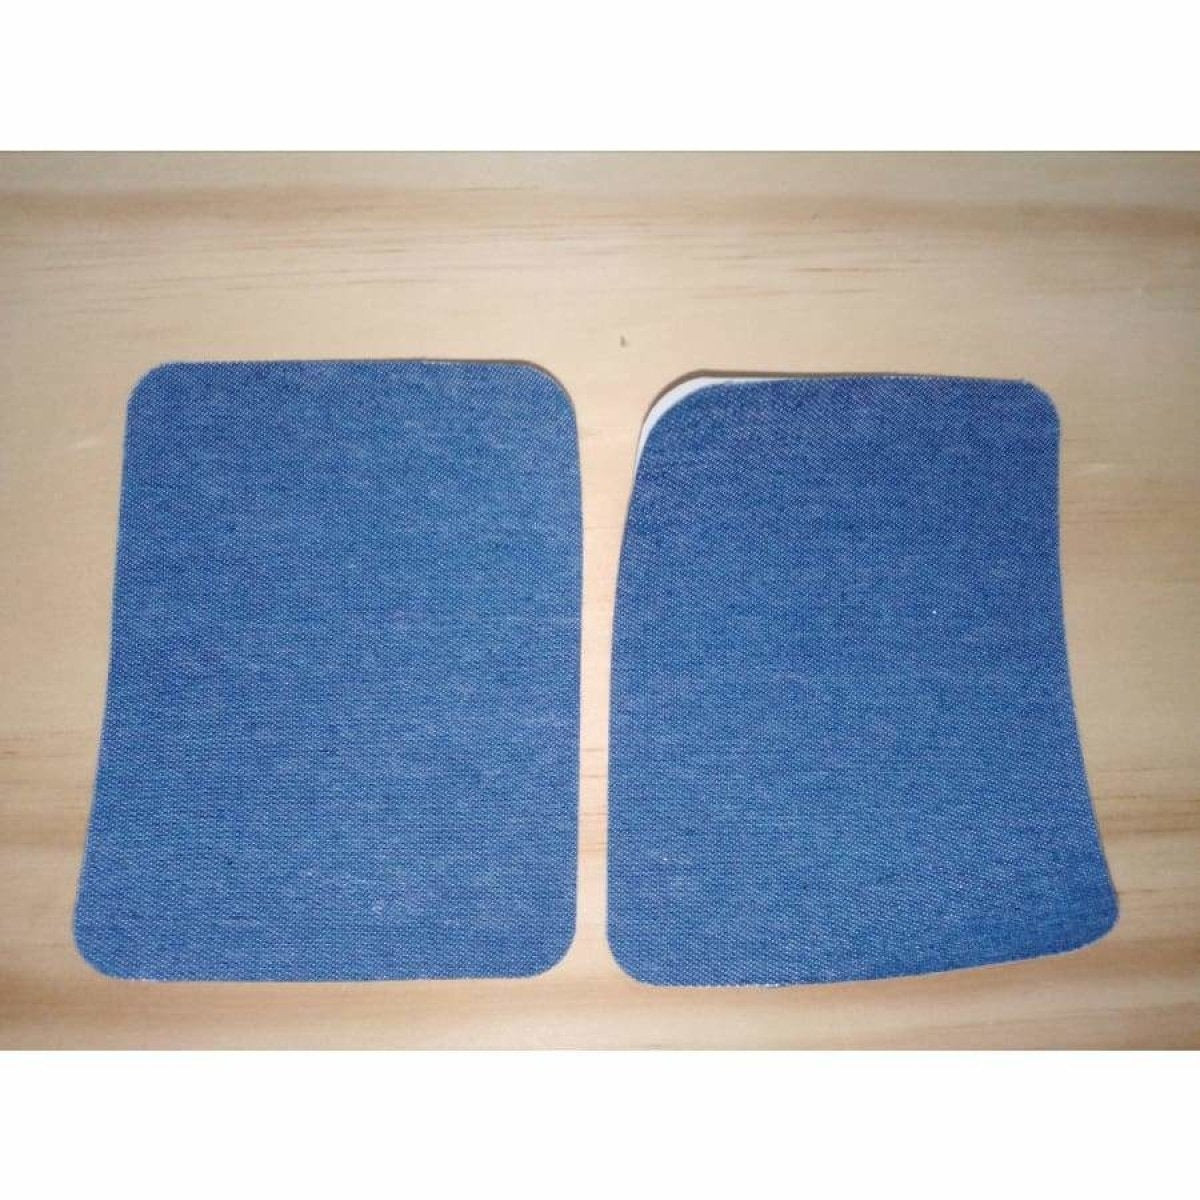 2pcs Iron-on Fabric Blue Black Denim Jeans Clothing Jacket Patch Patches Repair Sewing Shapes - 12.5x9.5cm Blue B - - Asia Sell